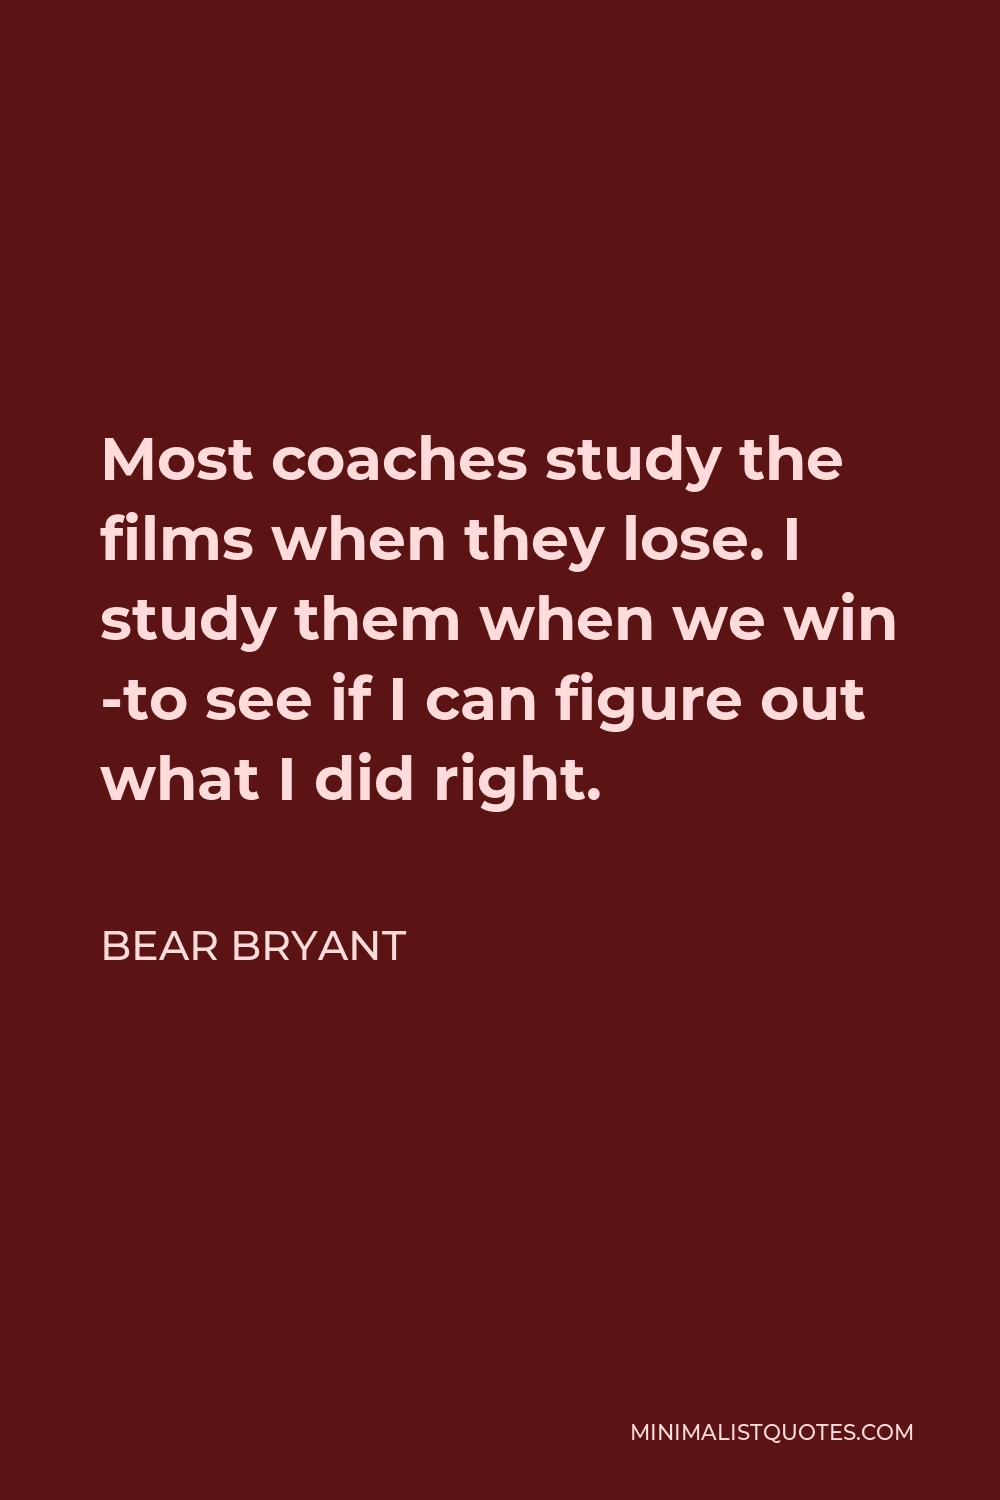 Bear Bryant Quote - Most coaches study the films when they lose. I study them when we win -to see if I can figure out what I did right.